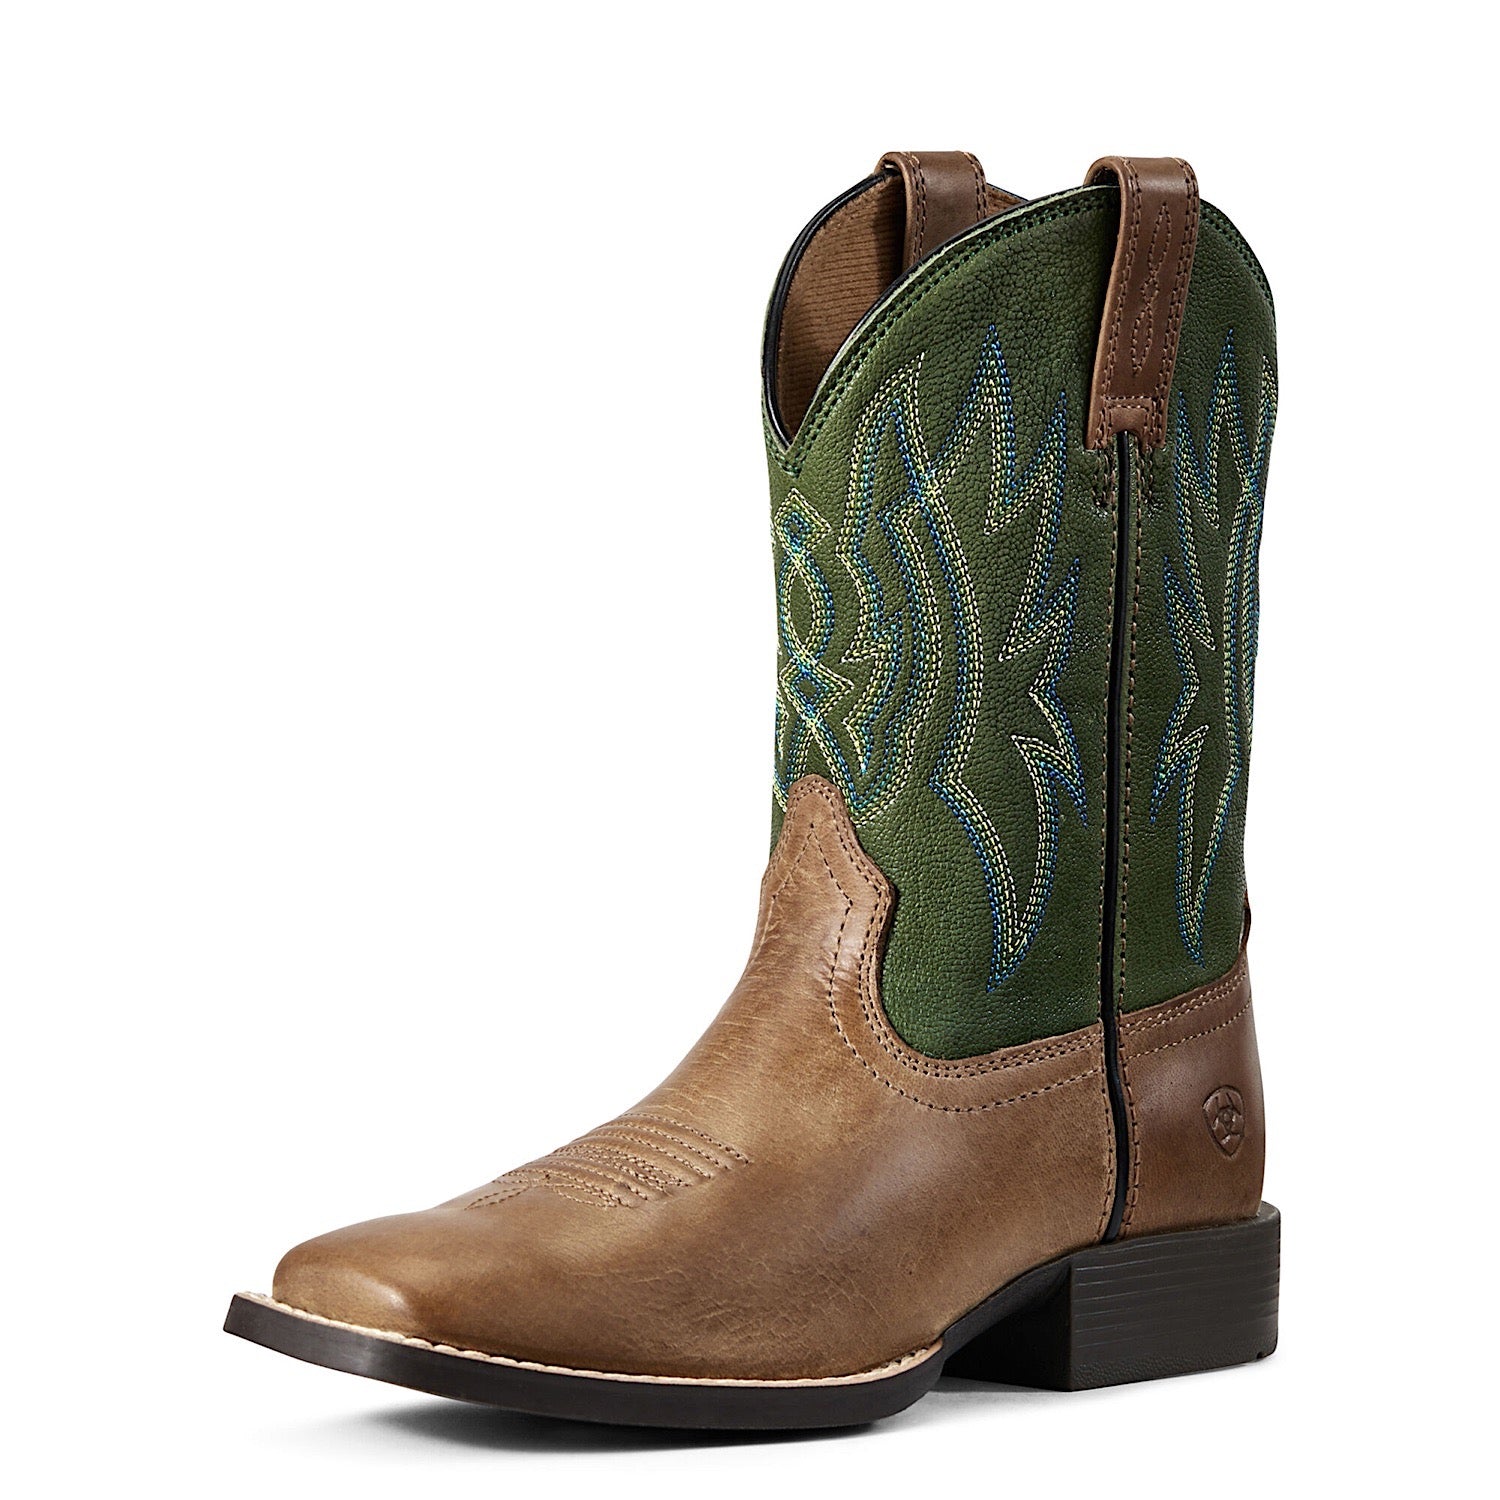 Buy Ariat Kids Pace Setter Baked Cookie/Grass Green - The Stable Door